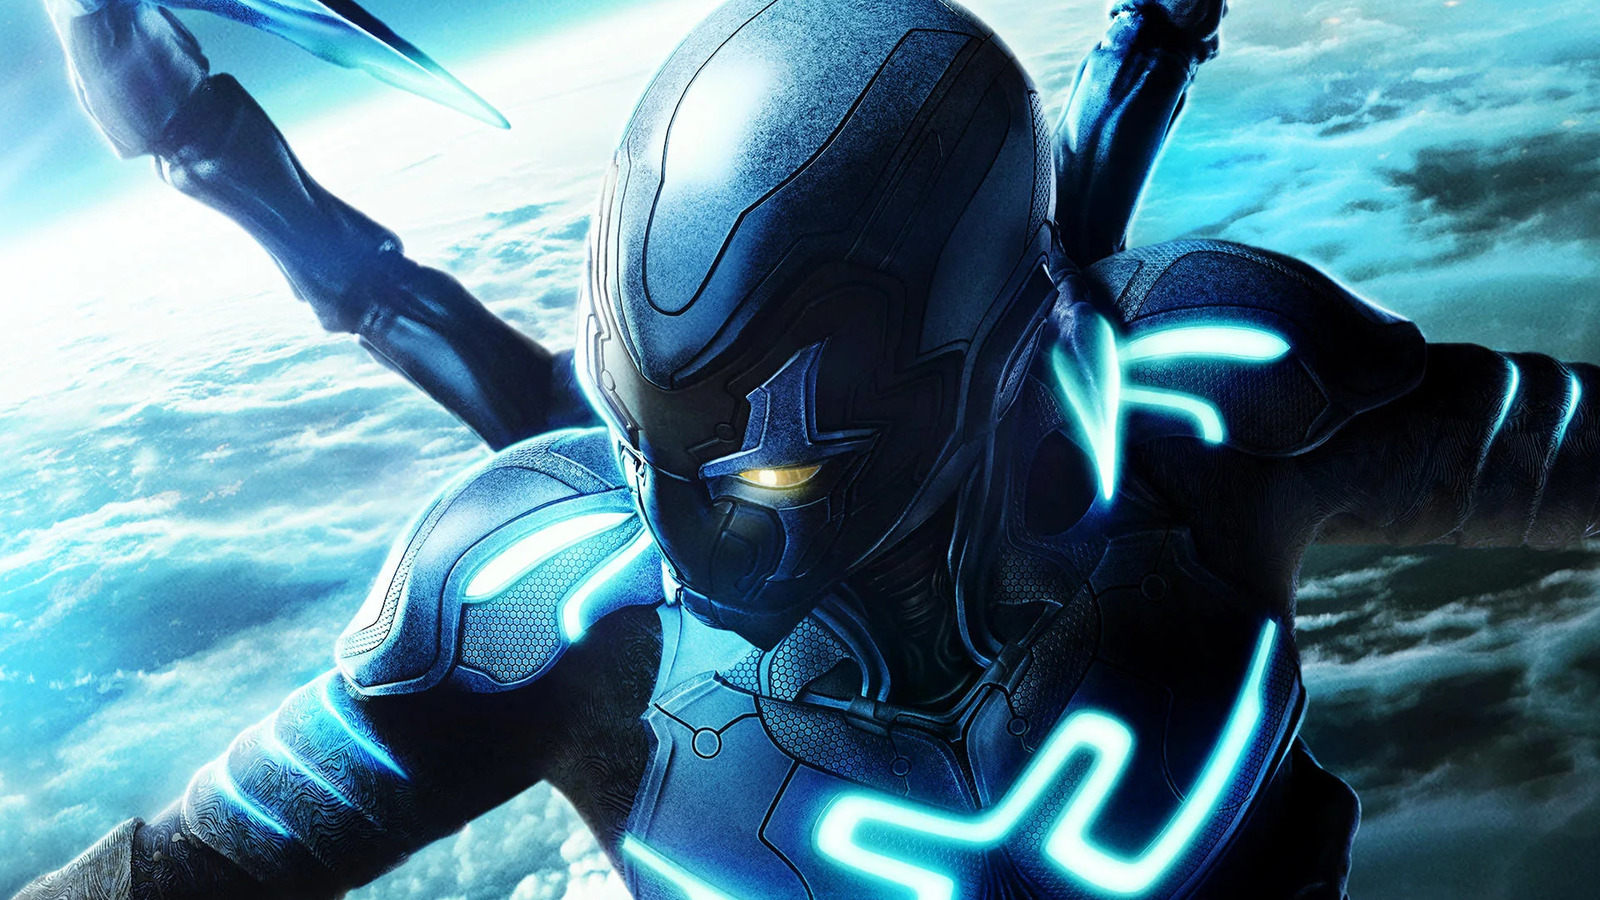 Blue Beetle Dethrones Barbie At The Box Office With $25 Million Opening  Weekend